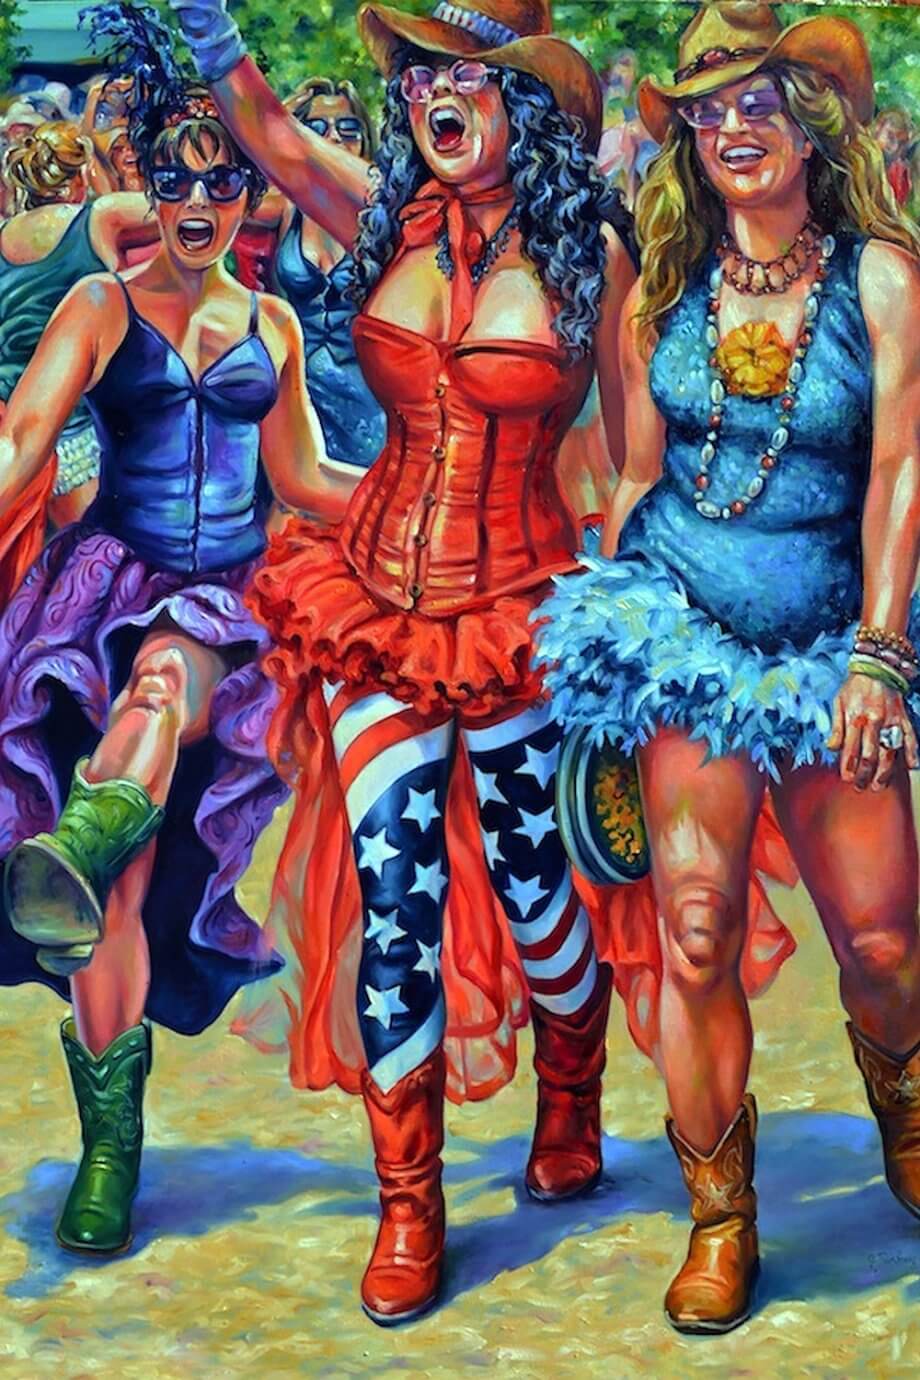 Jill and Robert Pankey painting - 3 modern cowgirls in dresses